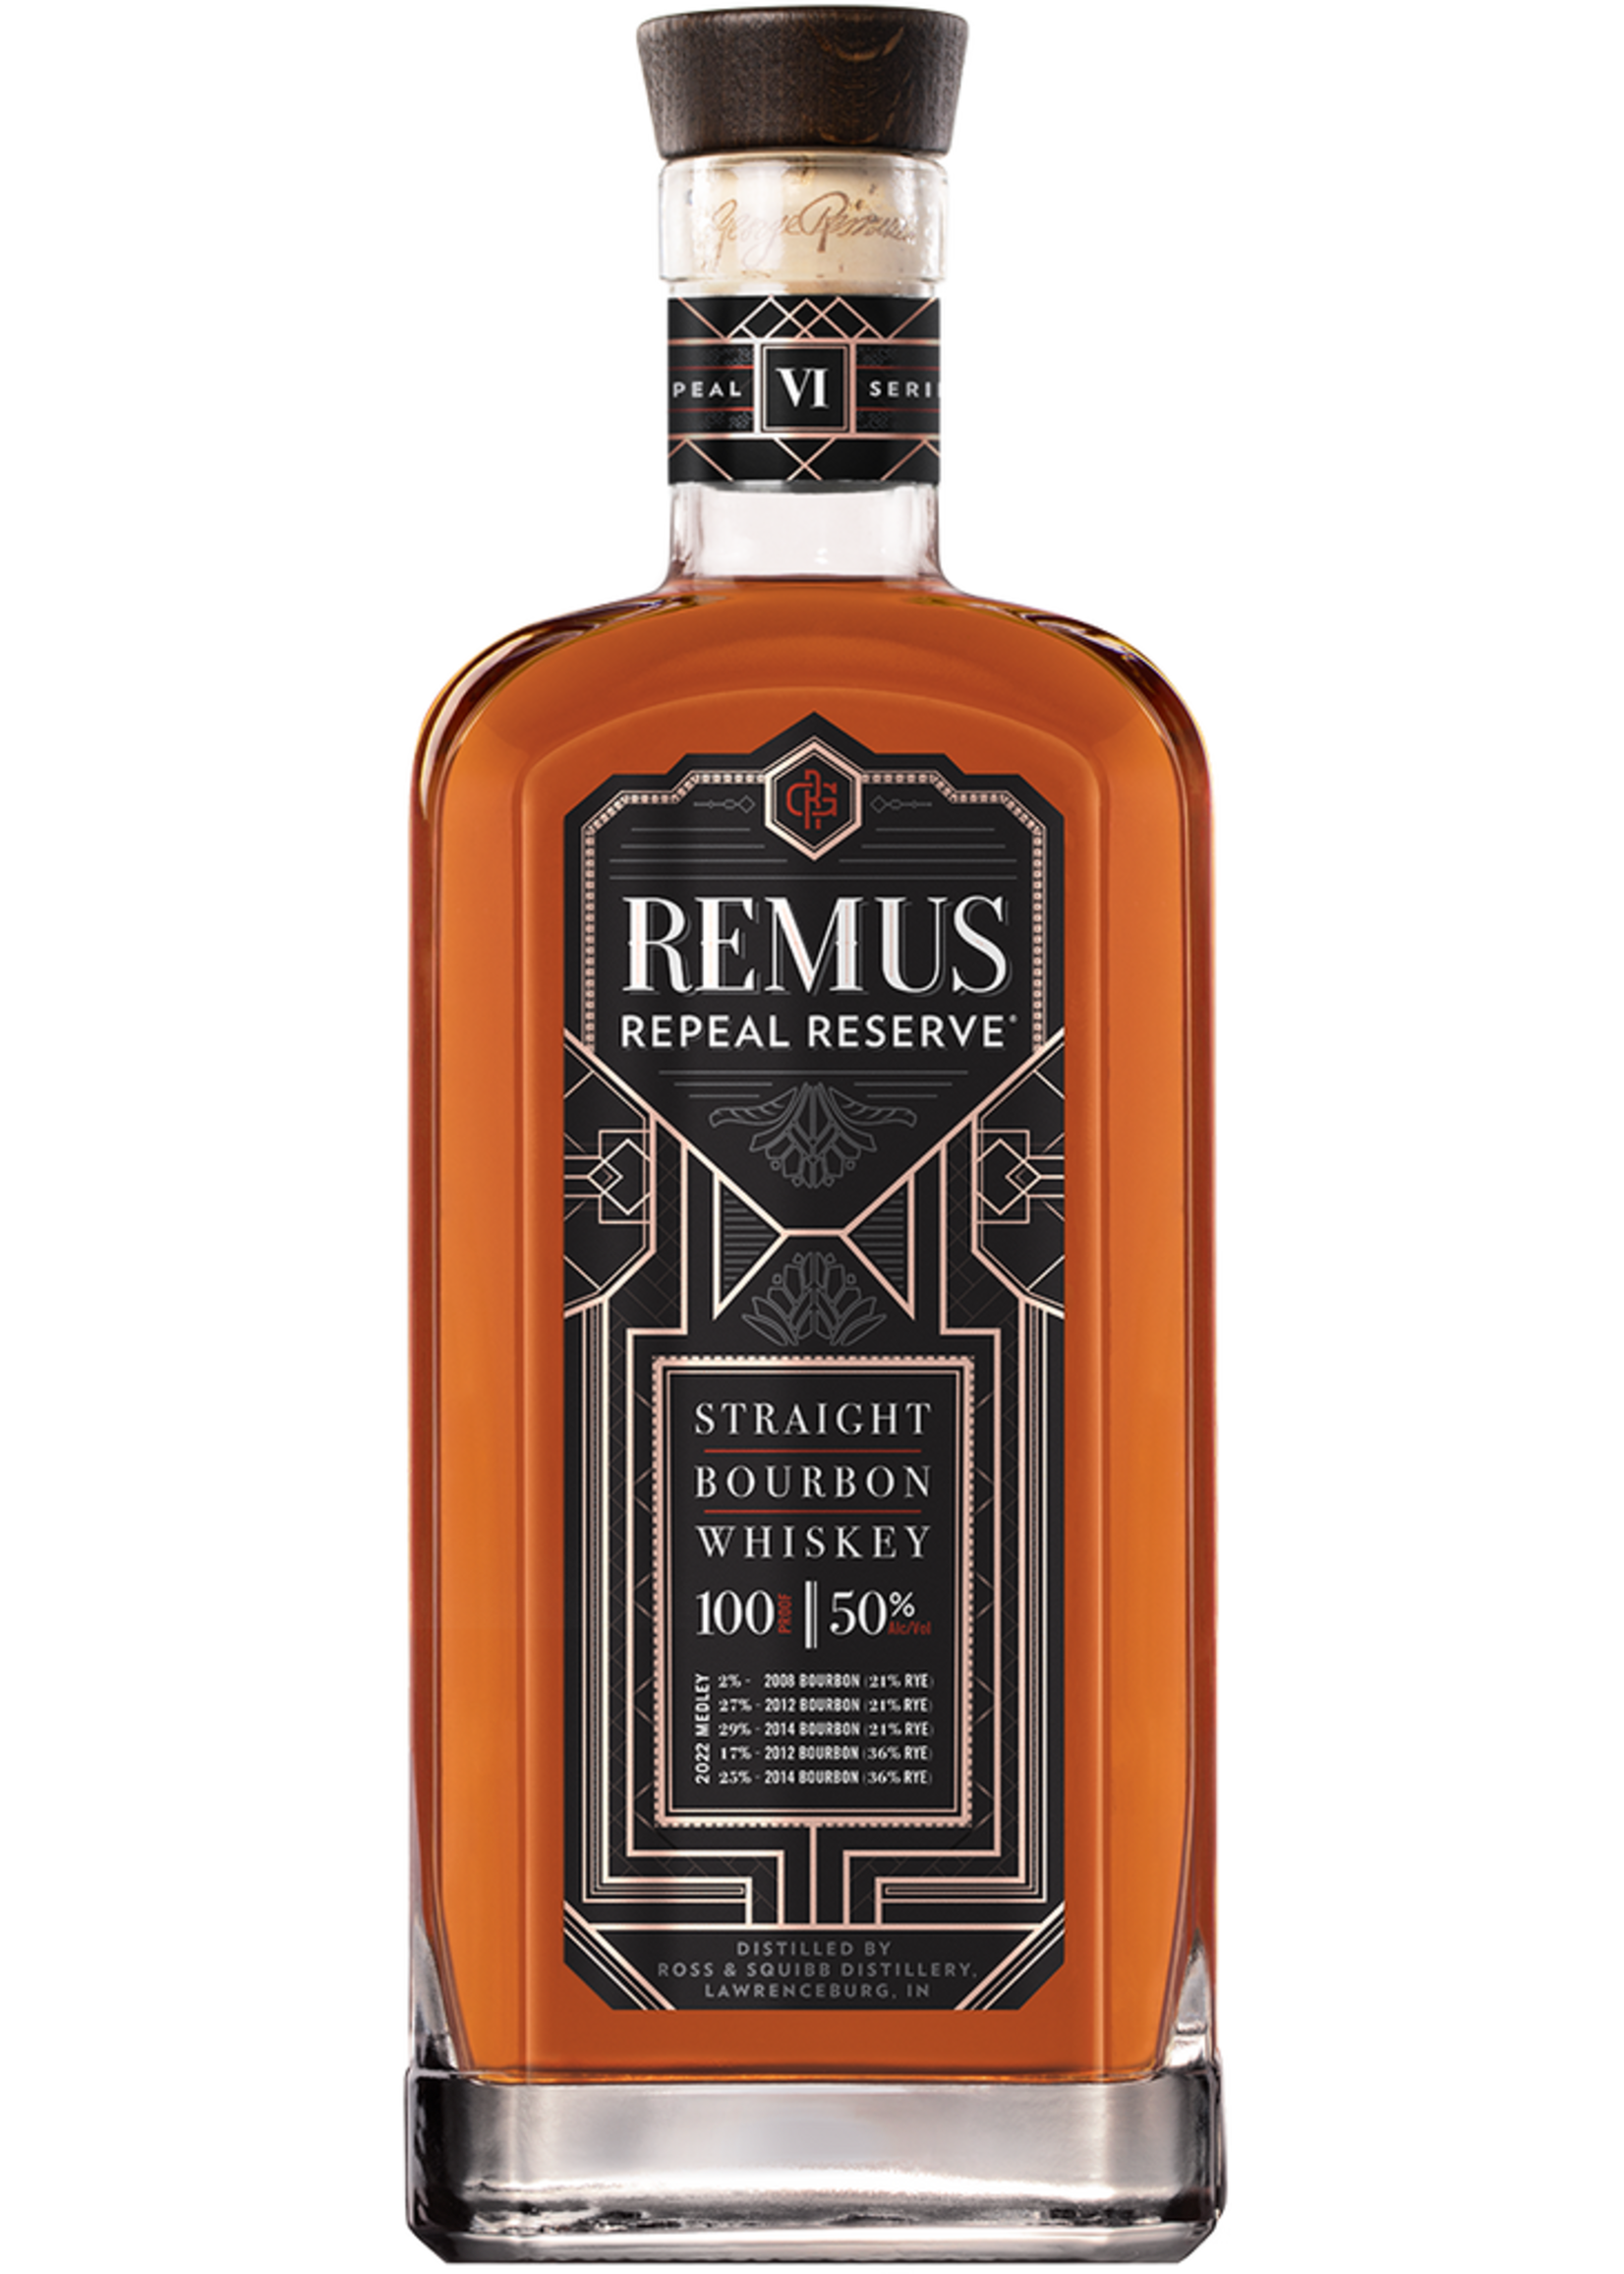 Remus Repeal Reserve Straight Bourbon Whiskey Series VI 100Proof 750ml